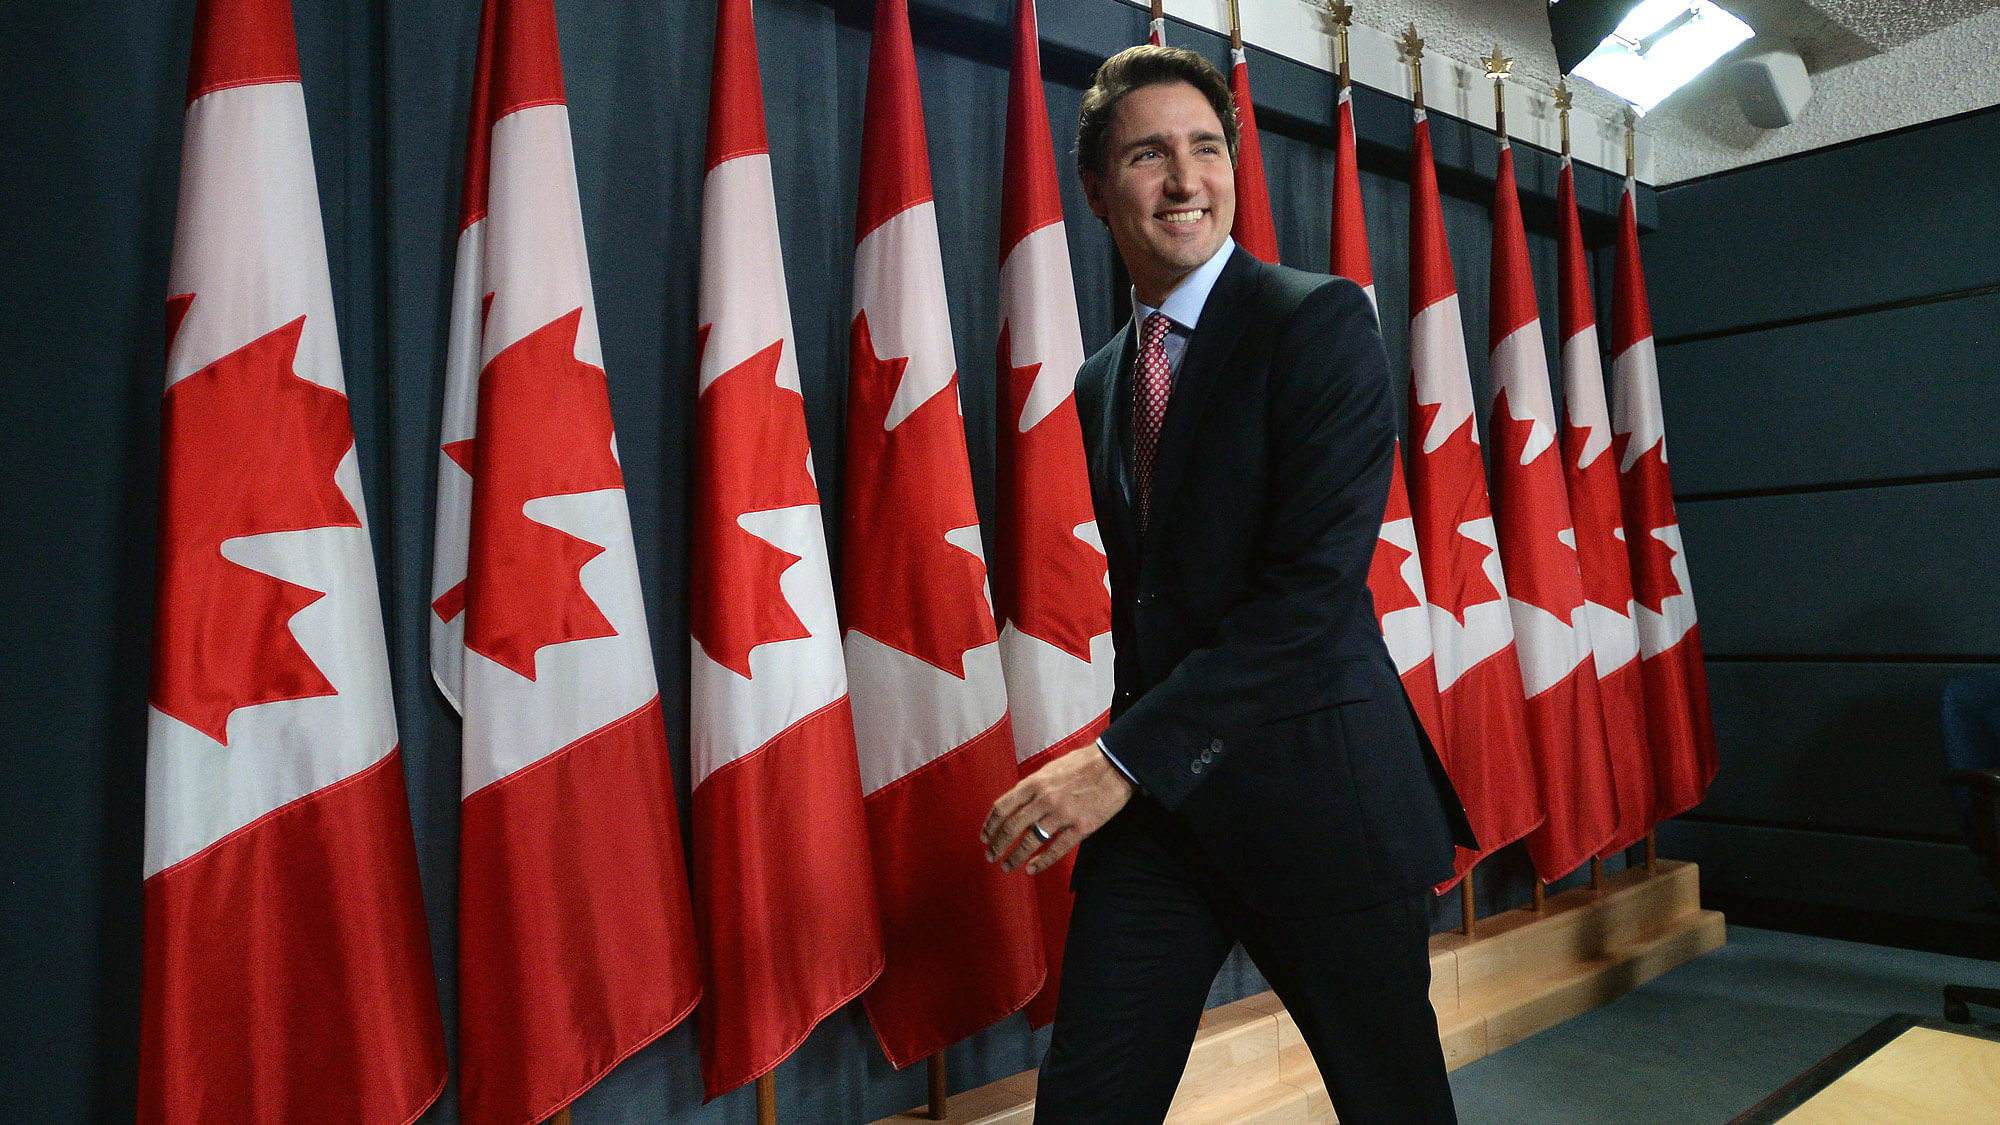 File photo of Canadian Prime Minister Justin Trudeau.